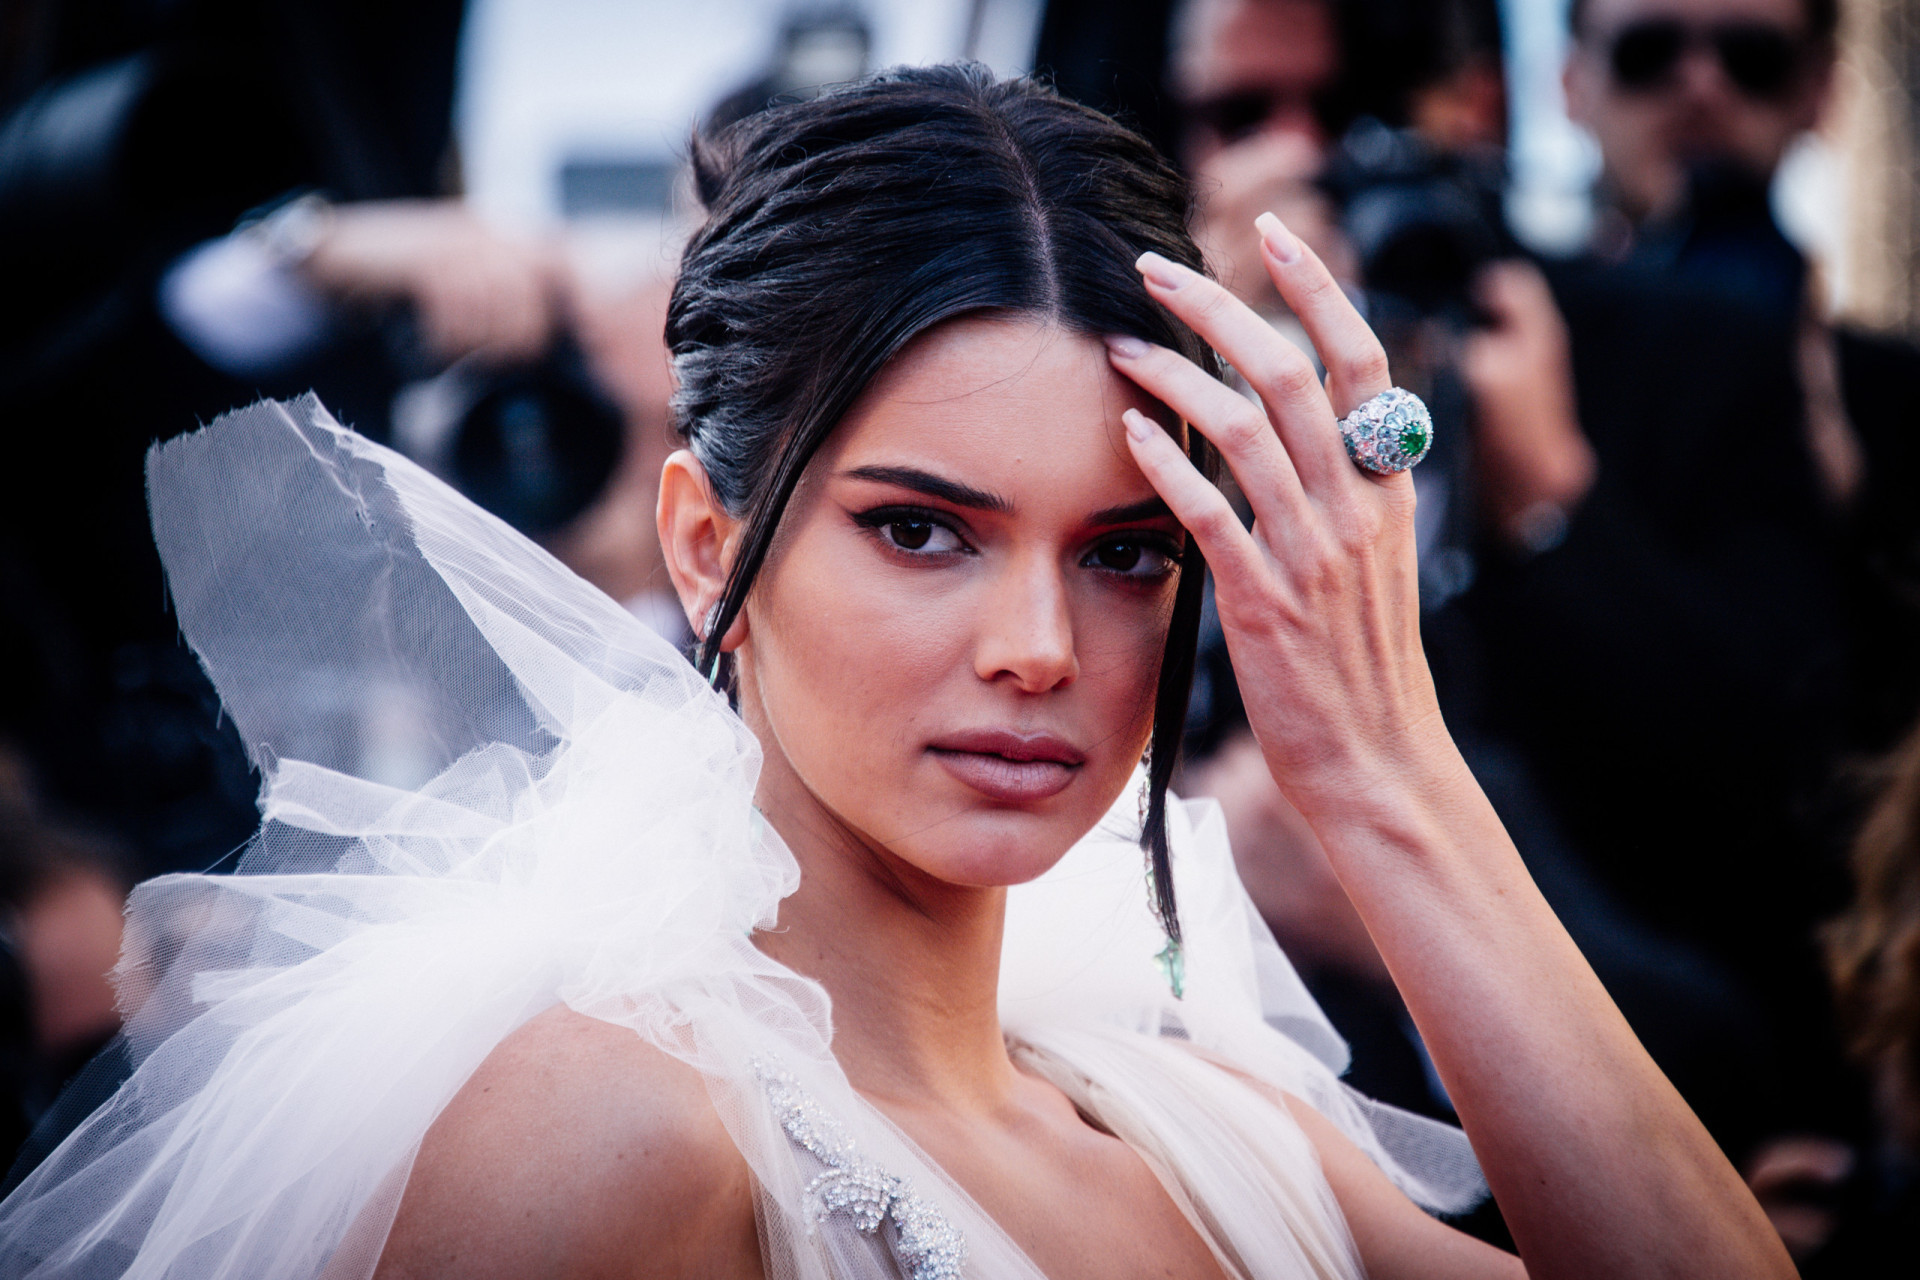 <p>After Kendall Jenner made comments about not liking makeup, a clip went viral from 'Keeping Up with the Kardashians' where she says she has a naturally athletic body, and people accused her of being a pick-me girl. Then she posted a TikTok in February 2022 of herself wiping out on a snowboard with her own audio overtop saying "I'm literally built as an athlete. Every blood test I've ever done has said that I am, like, over the normal limit of athleticness." While some celebrated her in the comments, others said it was just further evidence.</p>